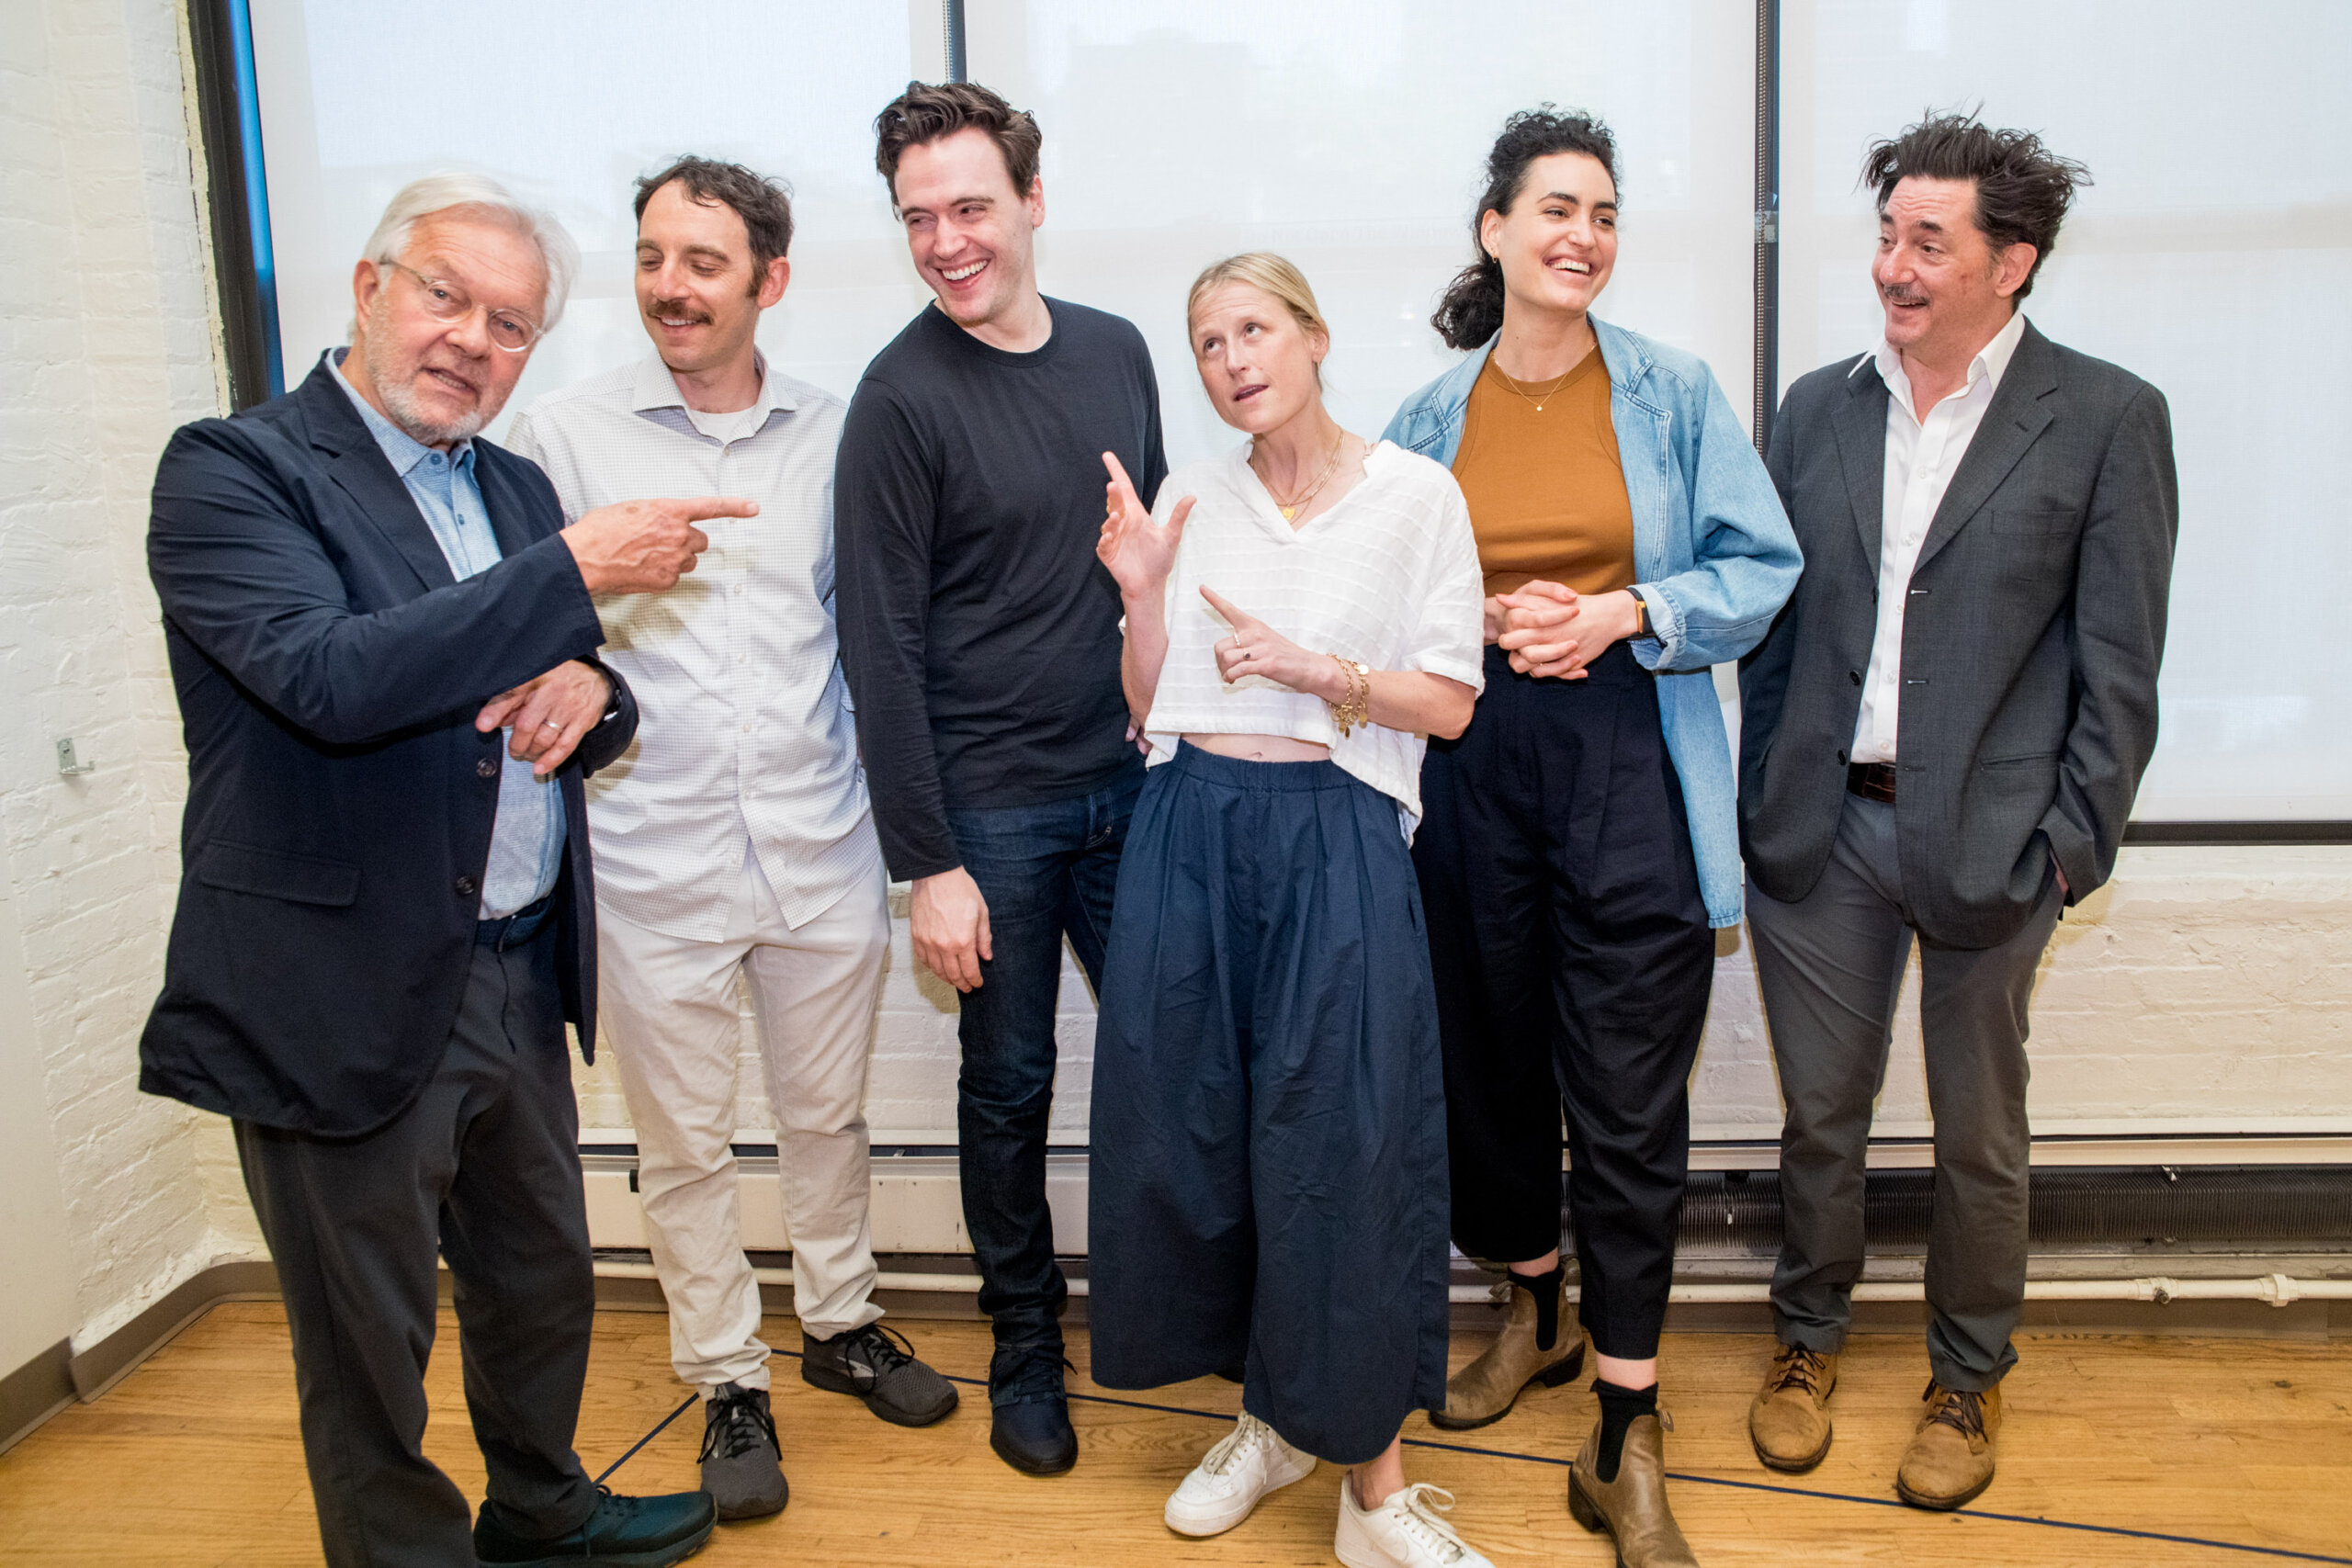 Bay Street Theater's "Dial M for Murder" Director Walter Bobbie with cast members Max Gordon Moore, Erich Bergen, Mamie Gummer, Rosa Gilmore and Reg Rogers